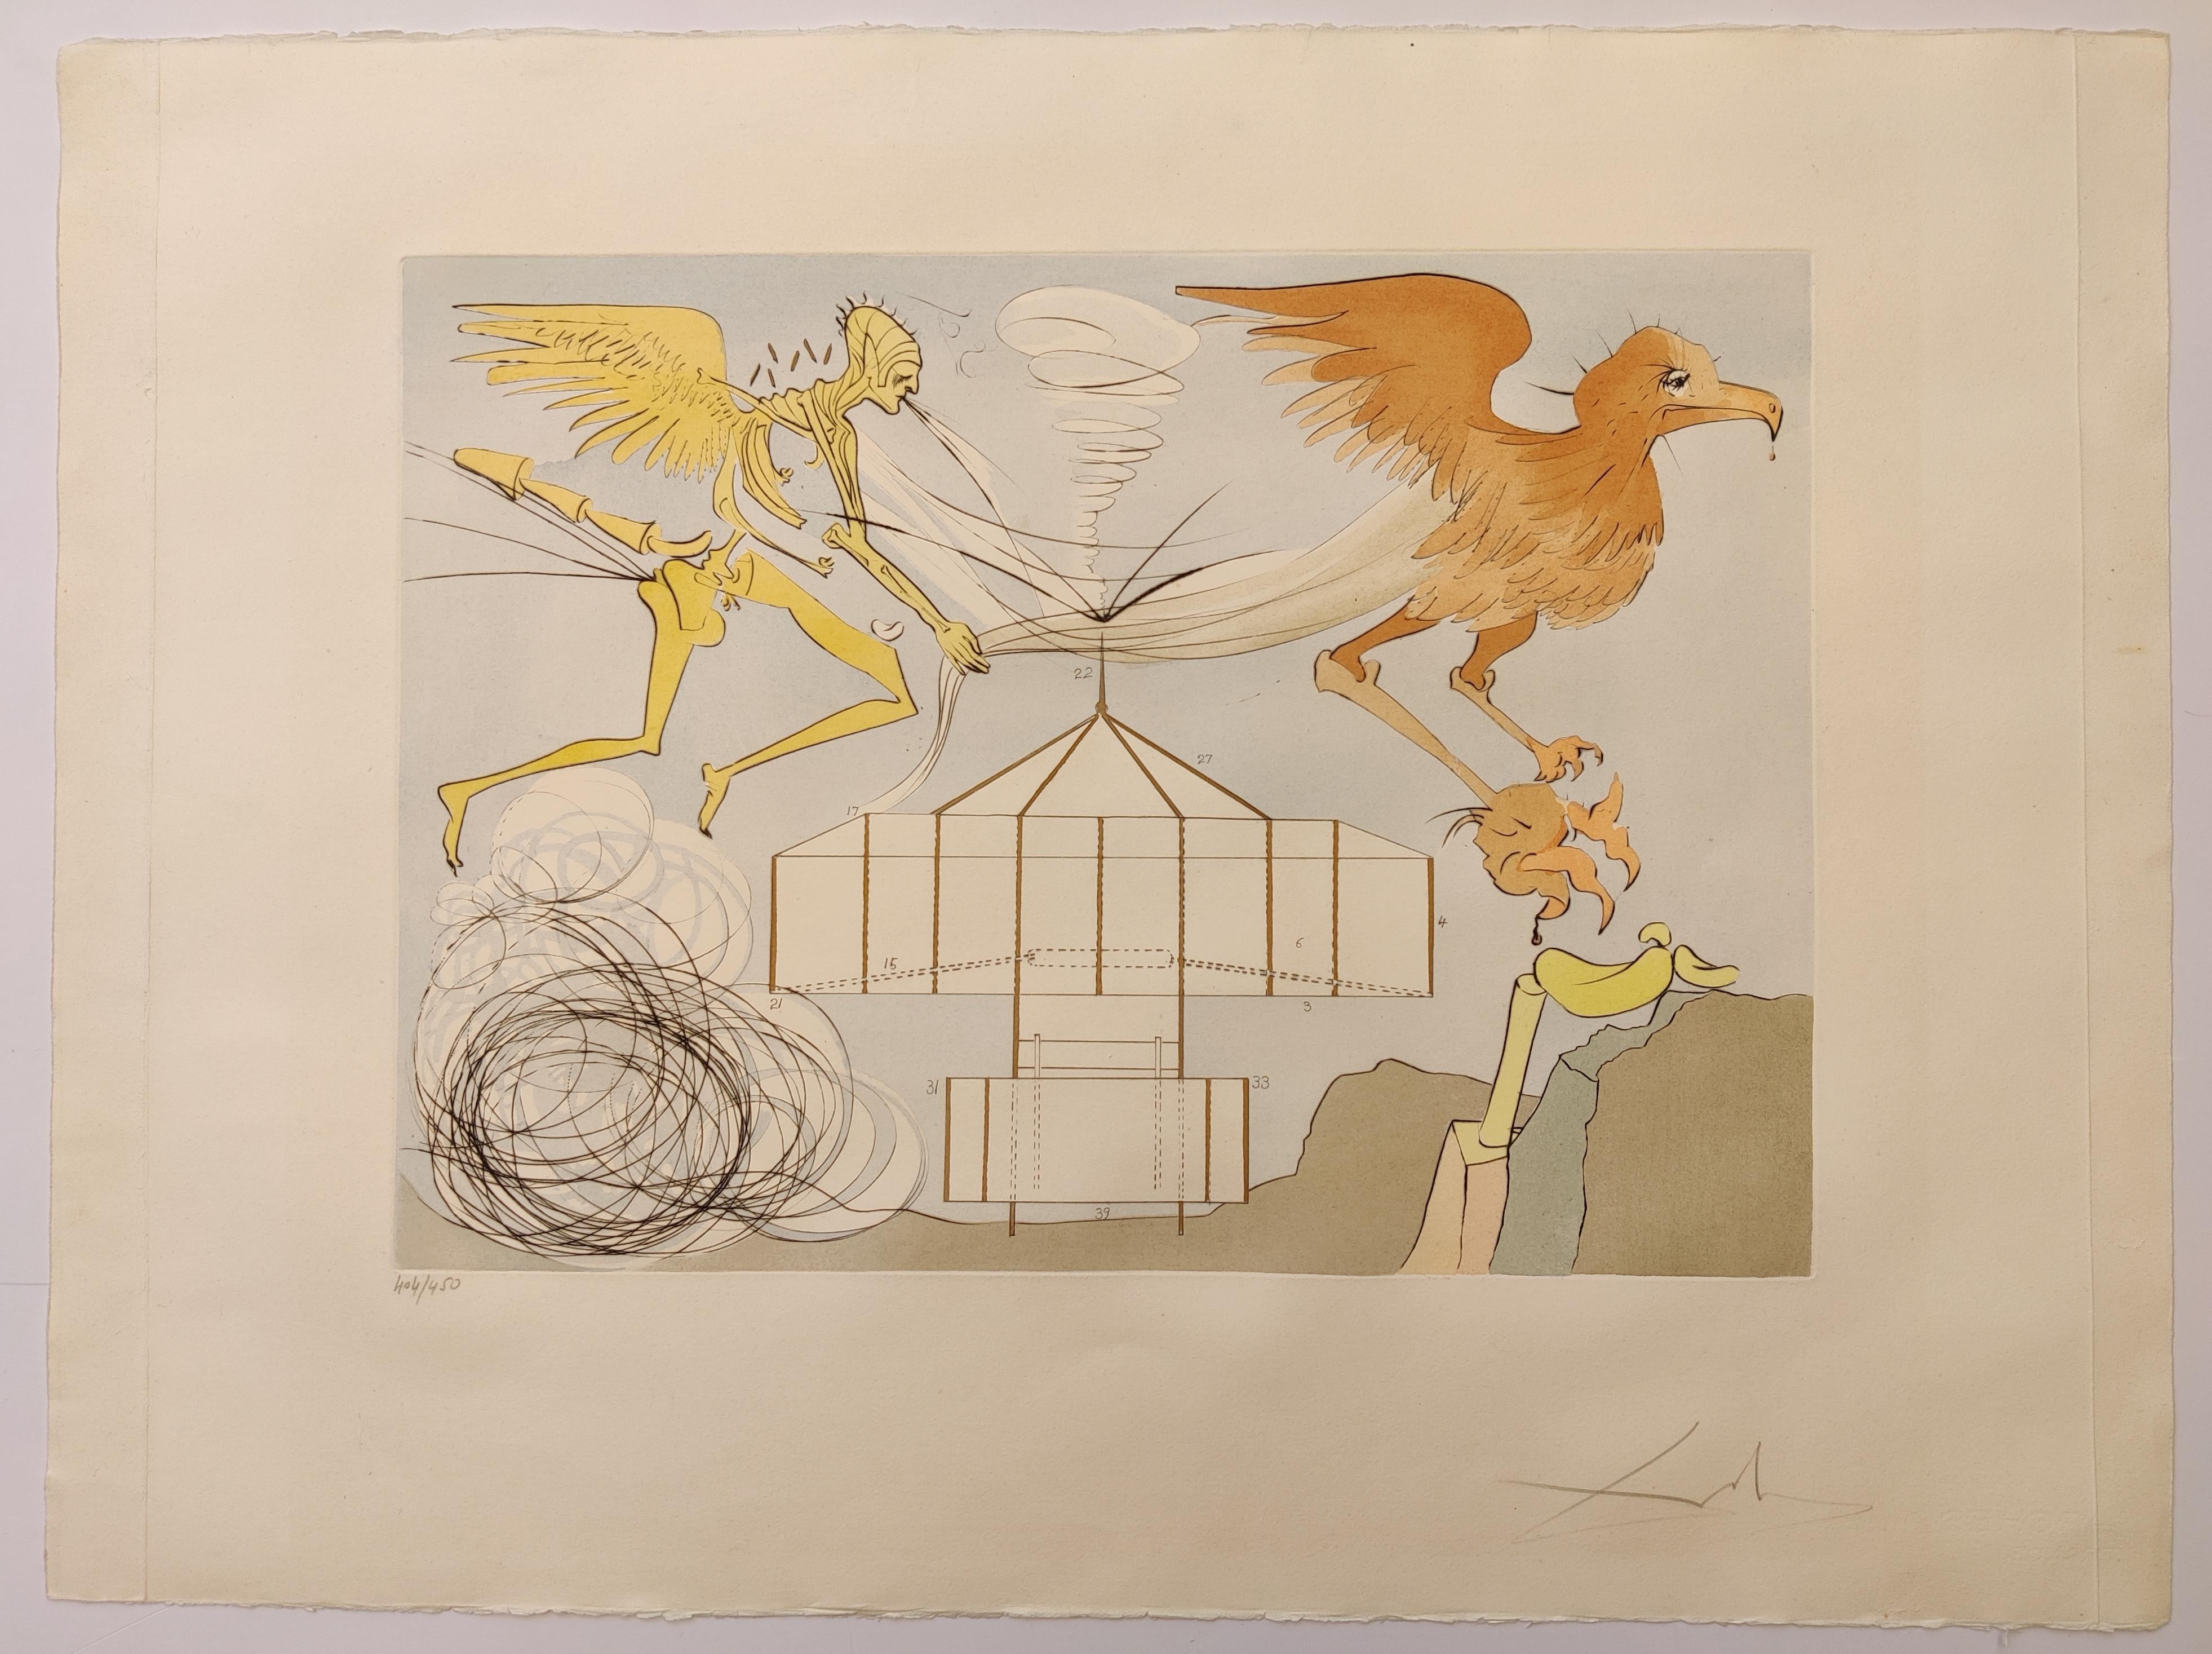 Salvador Dali  --  Homage a Leonardo da Vinci - Airplane, 1975
Etching with pochoir 
Edition 404/450 low left.
Hand signed low right
folded right and left margin
Image 50 x 36 cm
Sheet 76 x 56 cm
Creases on the left and right margin
Reference Field,